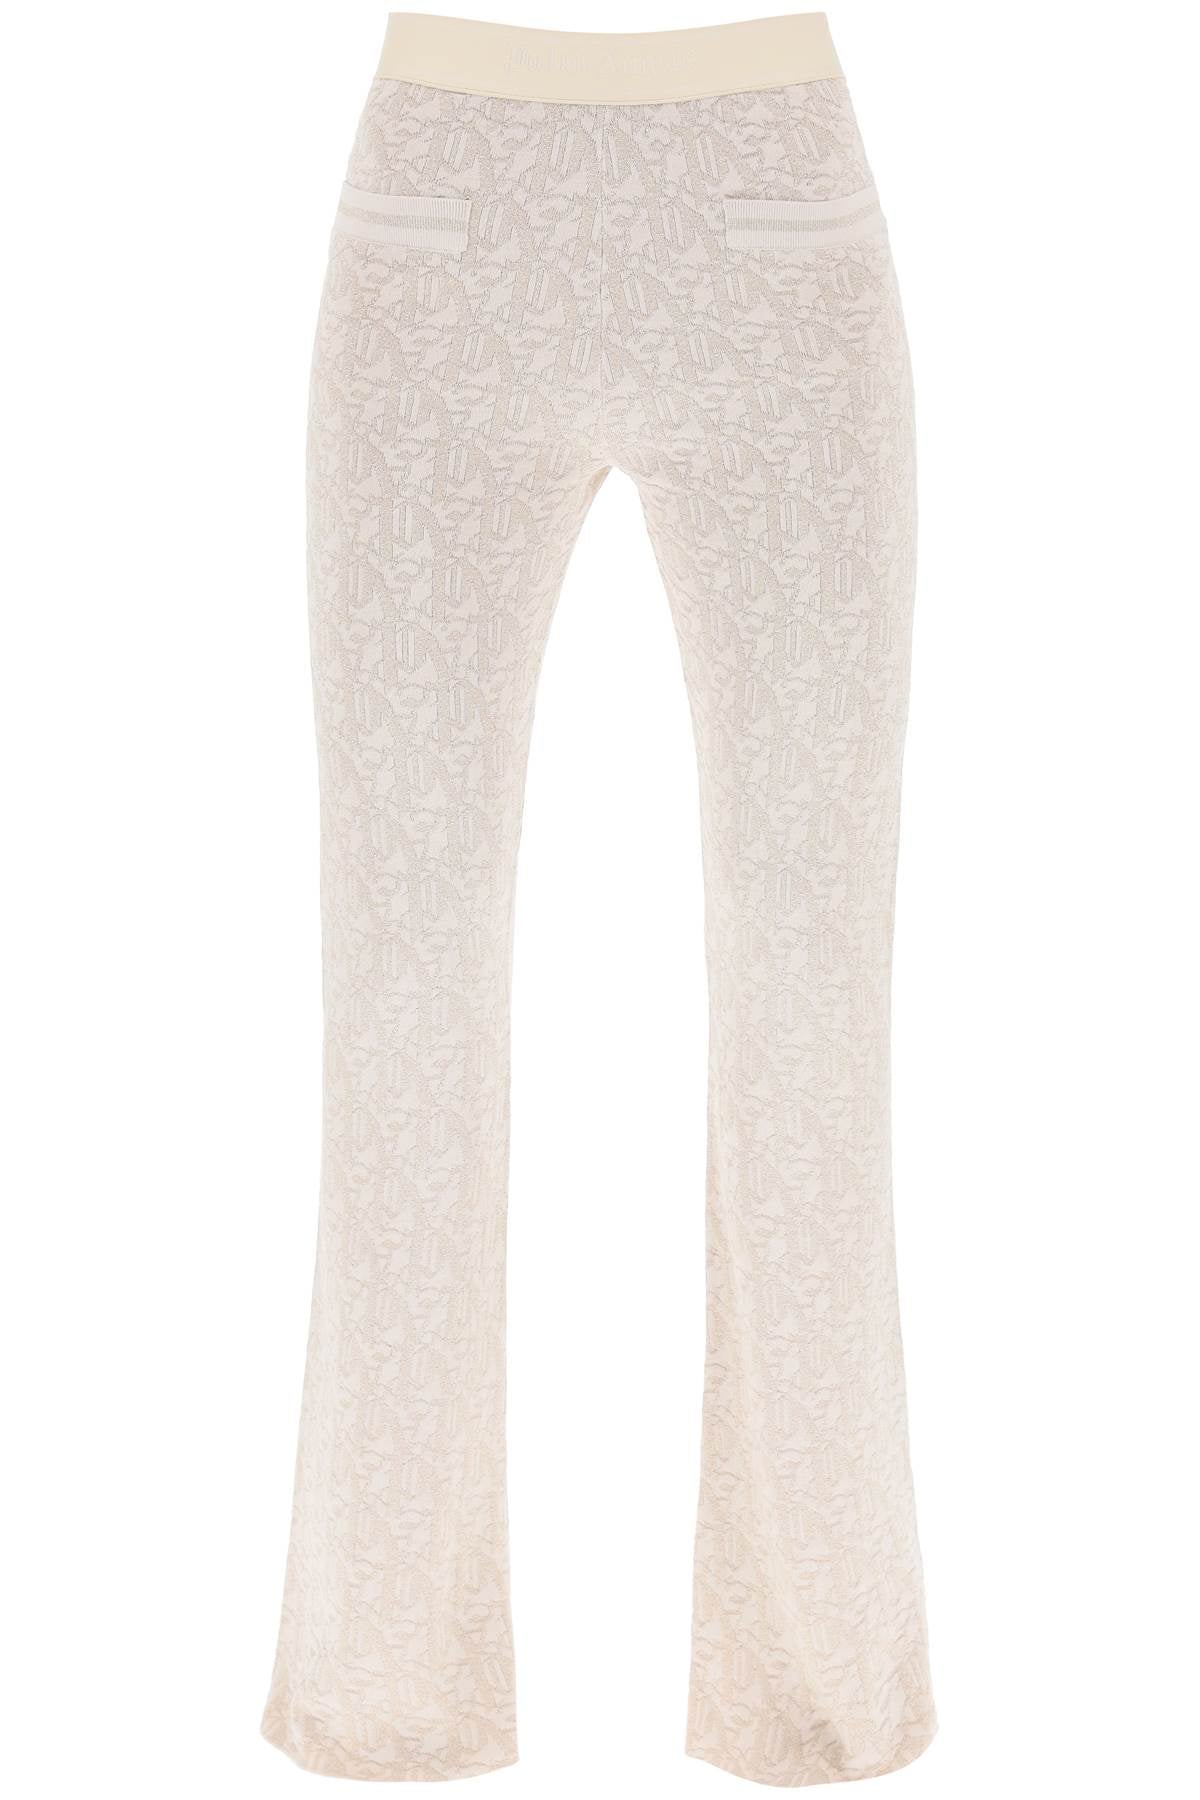 PALM ANGELS Flared Lurex Knit Pants with Paint Monogram Pattern for Women